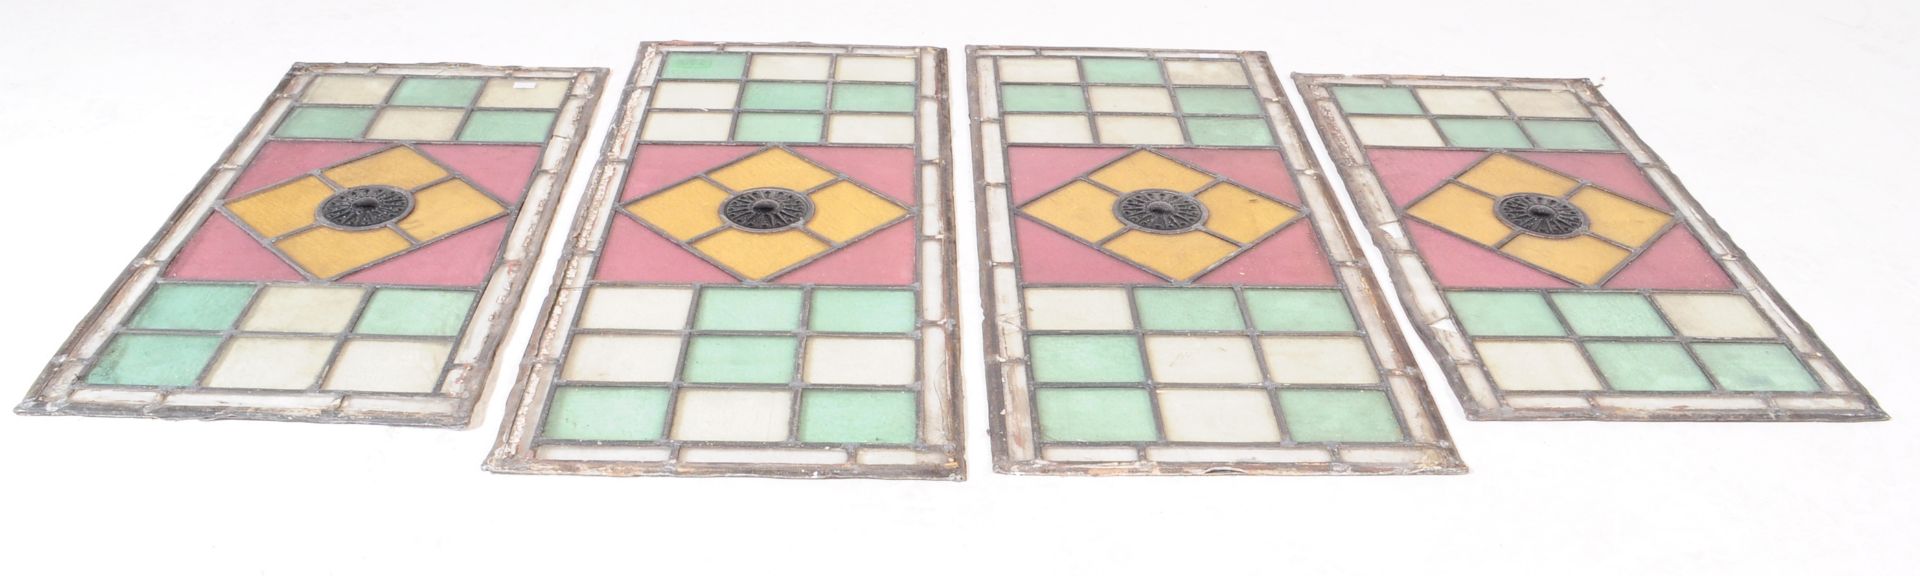 COLLECTION OF FOUR LEADED STAINED GLASS WINDOW PANELS - Image 3 of 5